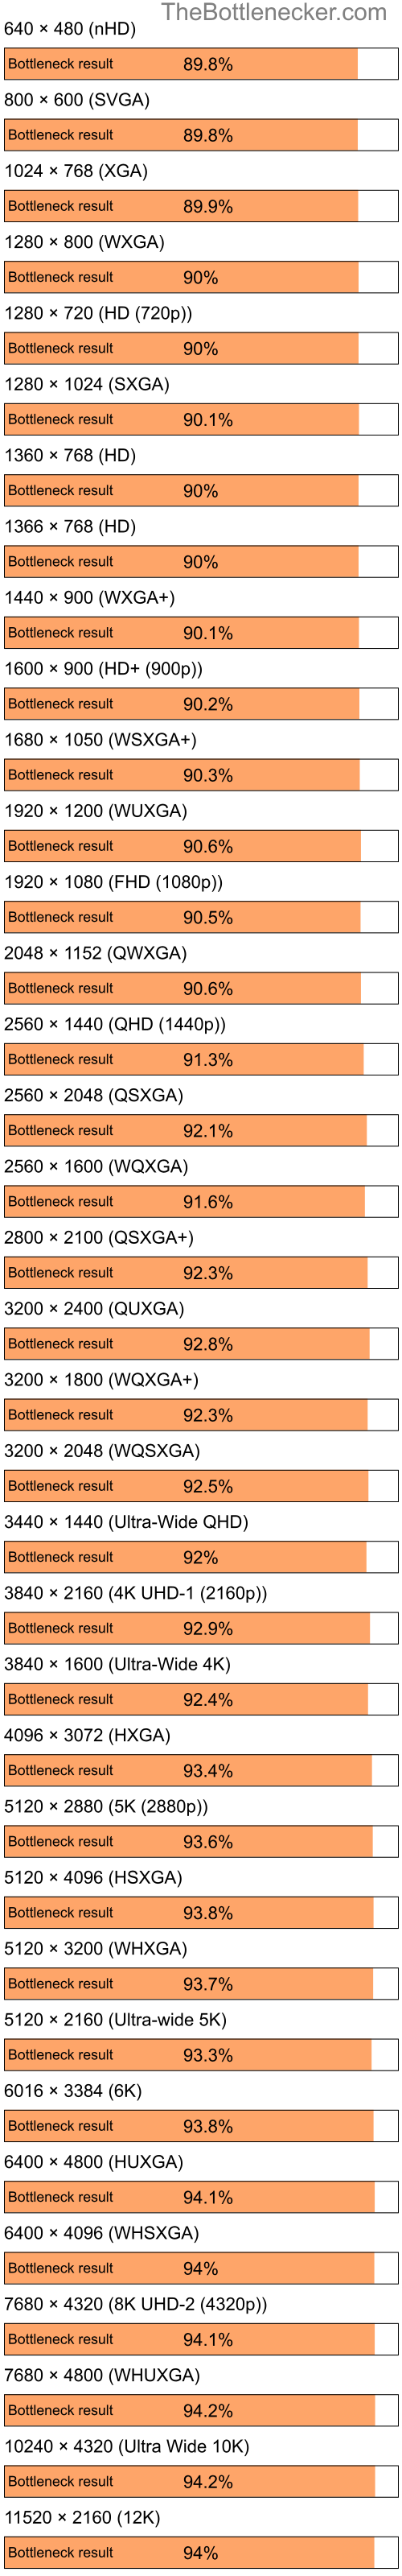 Bottleneck results by resolution for Intel Pentium 4 and NVIDIA GeForce2 Pro in General Tasks